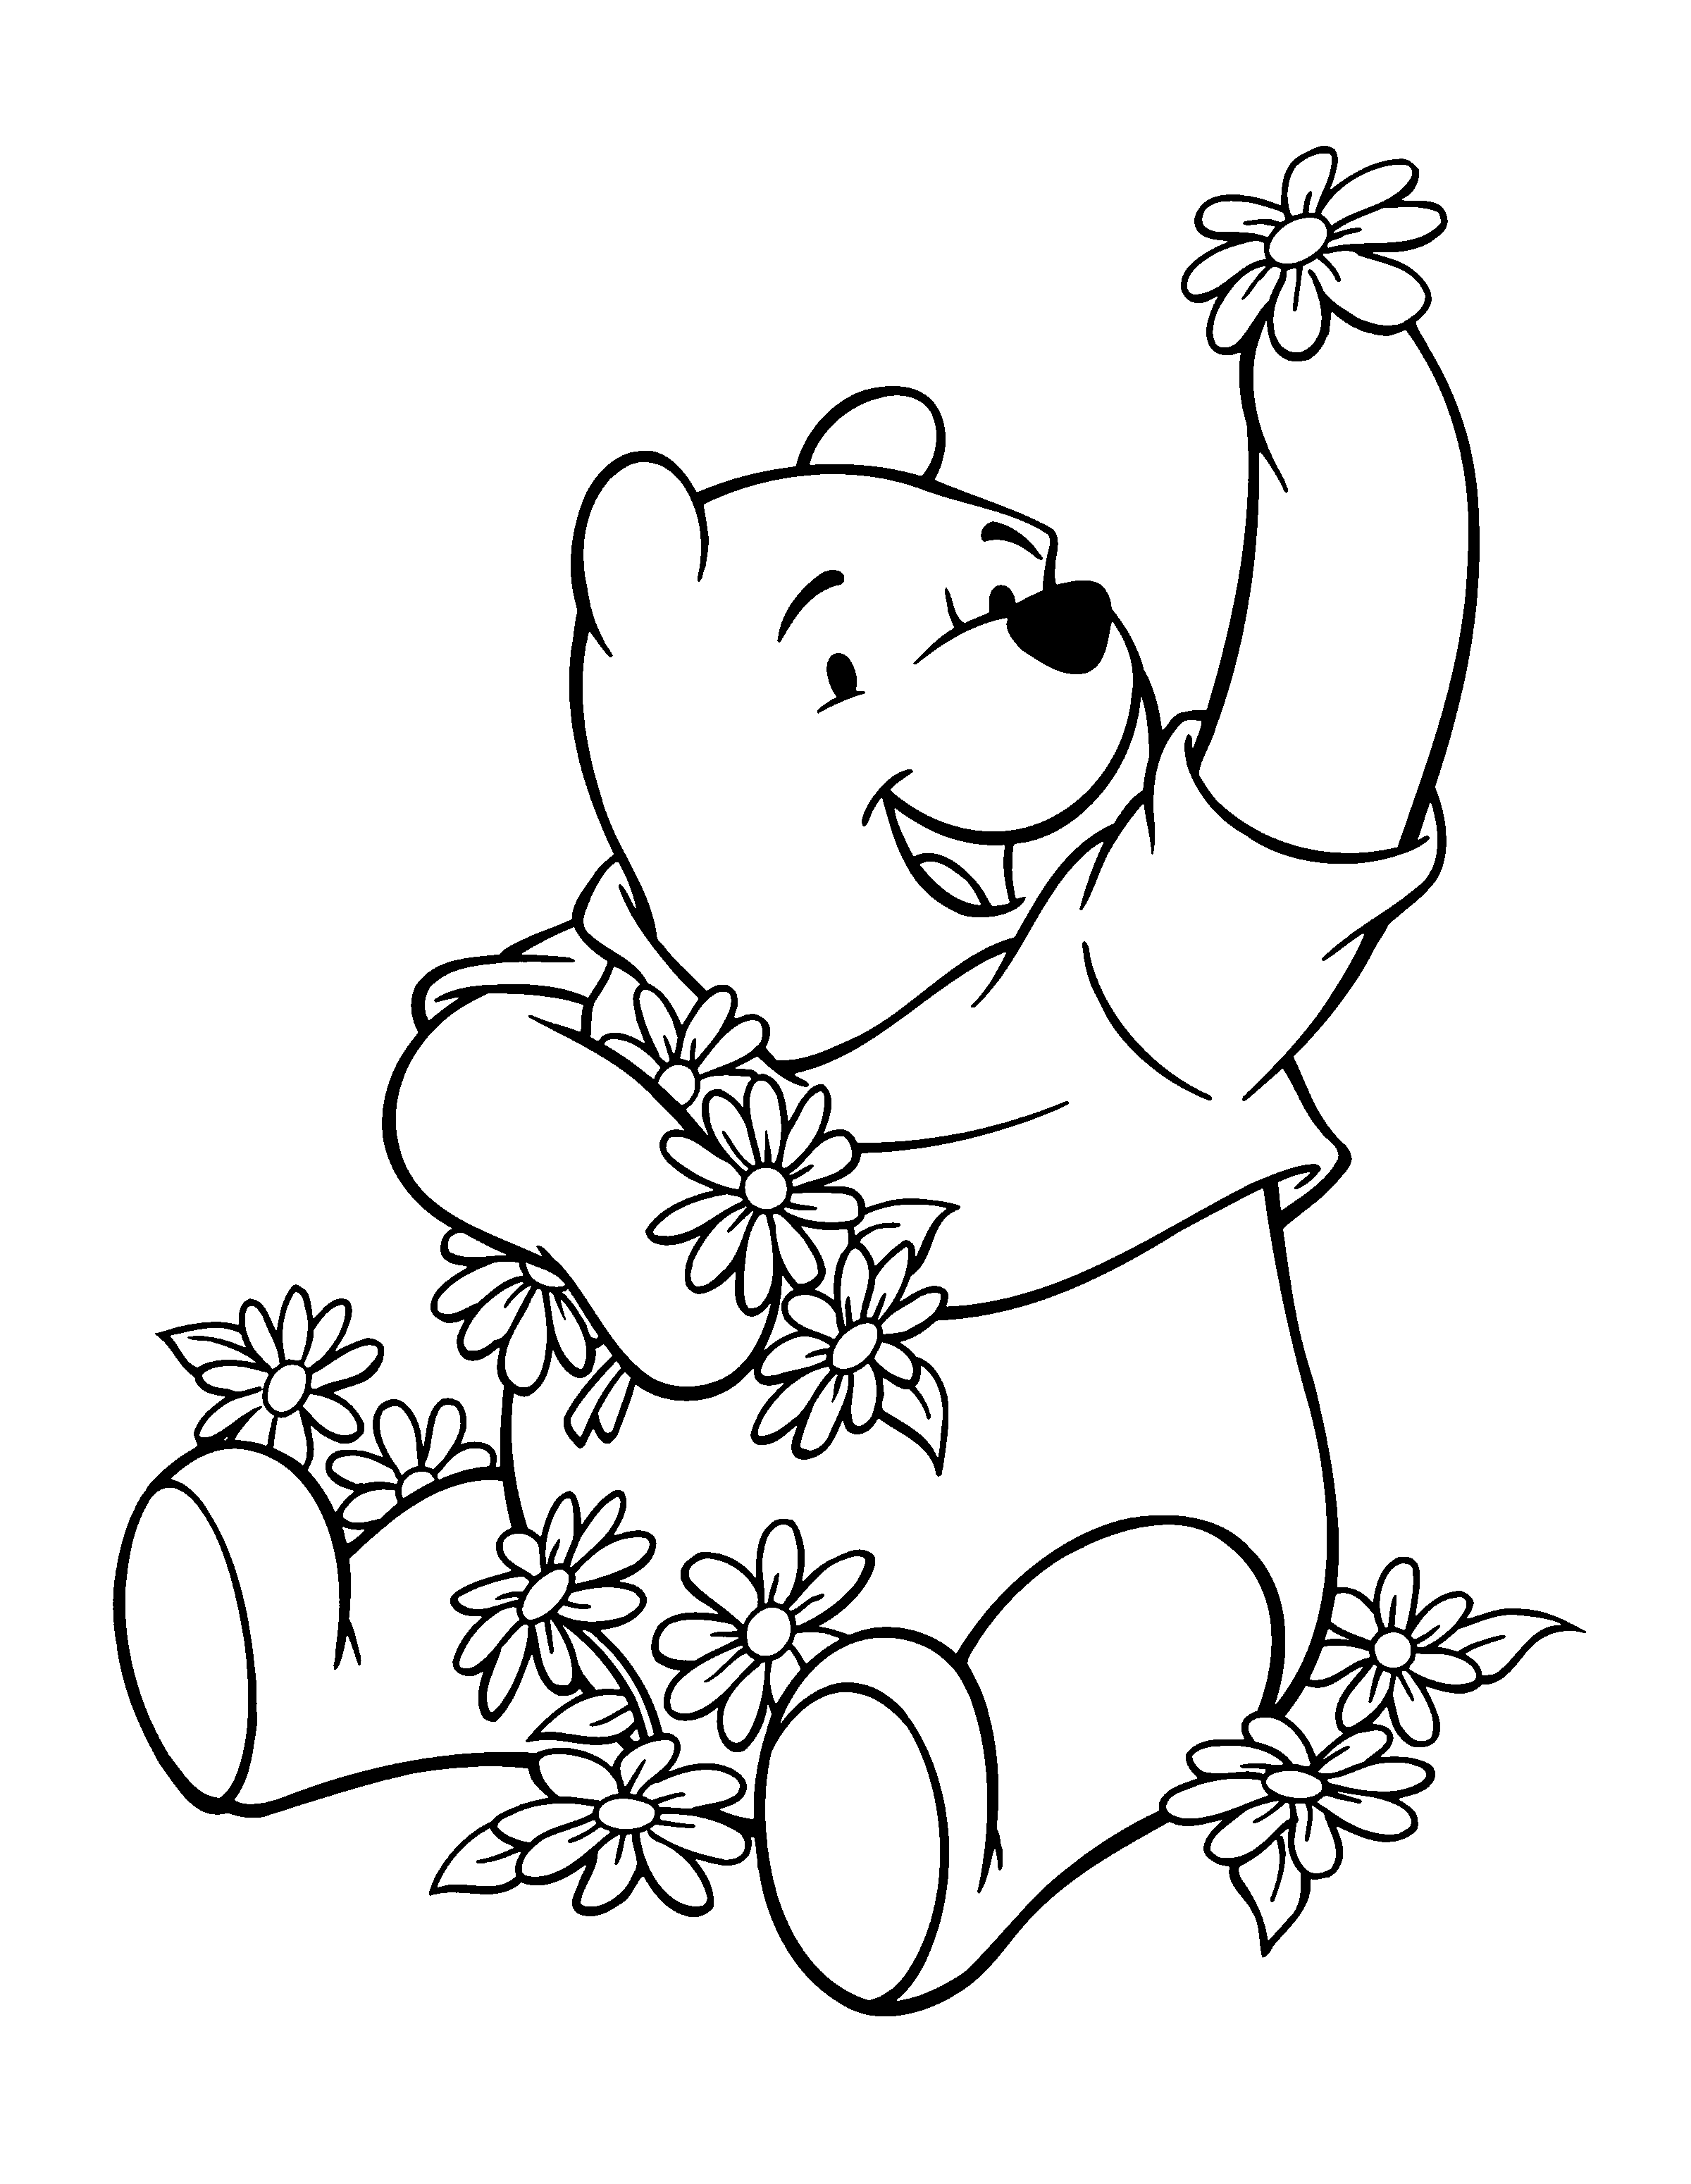 Classic Winnie The Pooh Coloring Pages for Pinterest